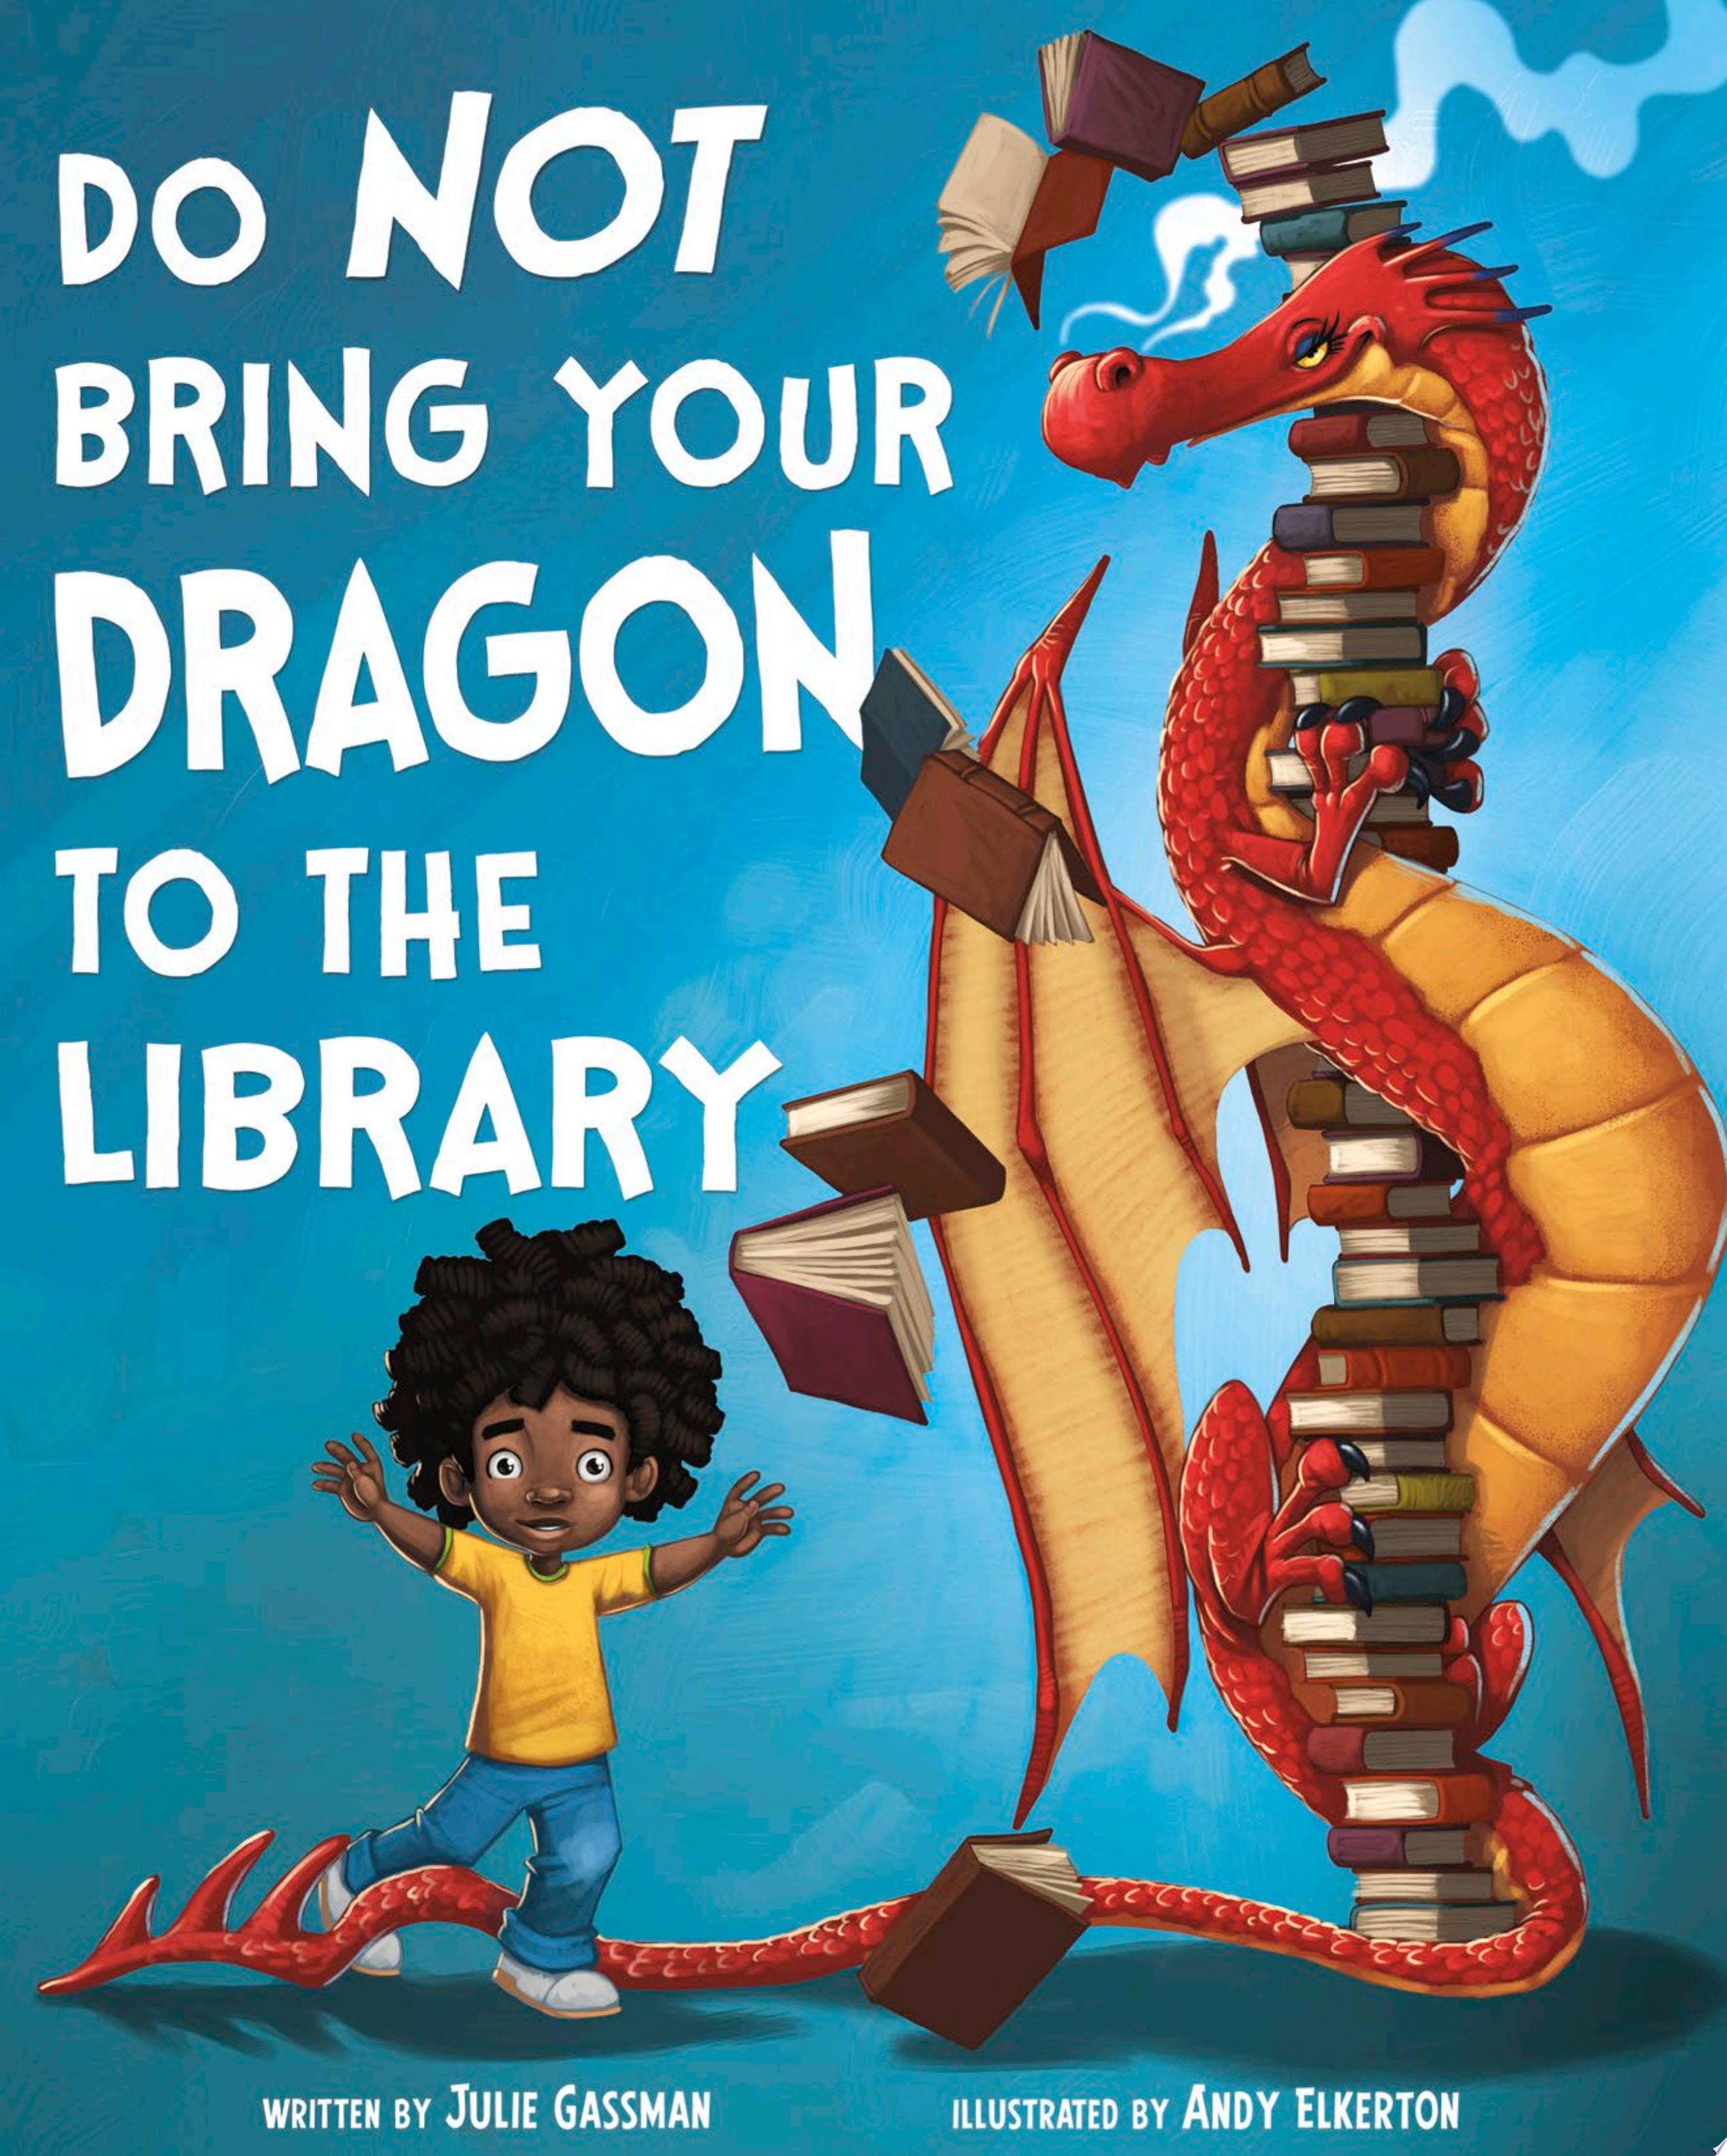 Image for "Do Not Bring Your Dragon to the Library"